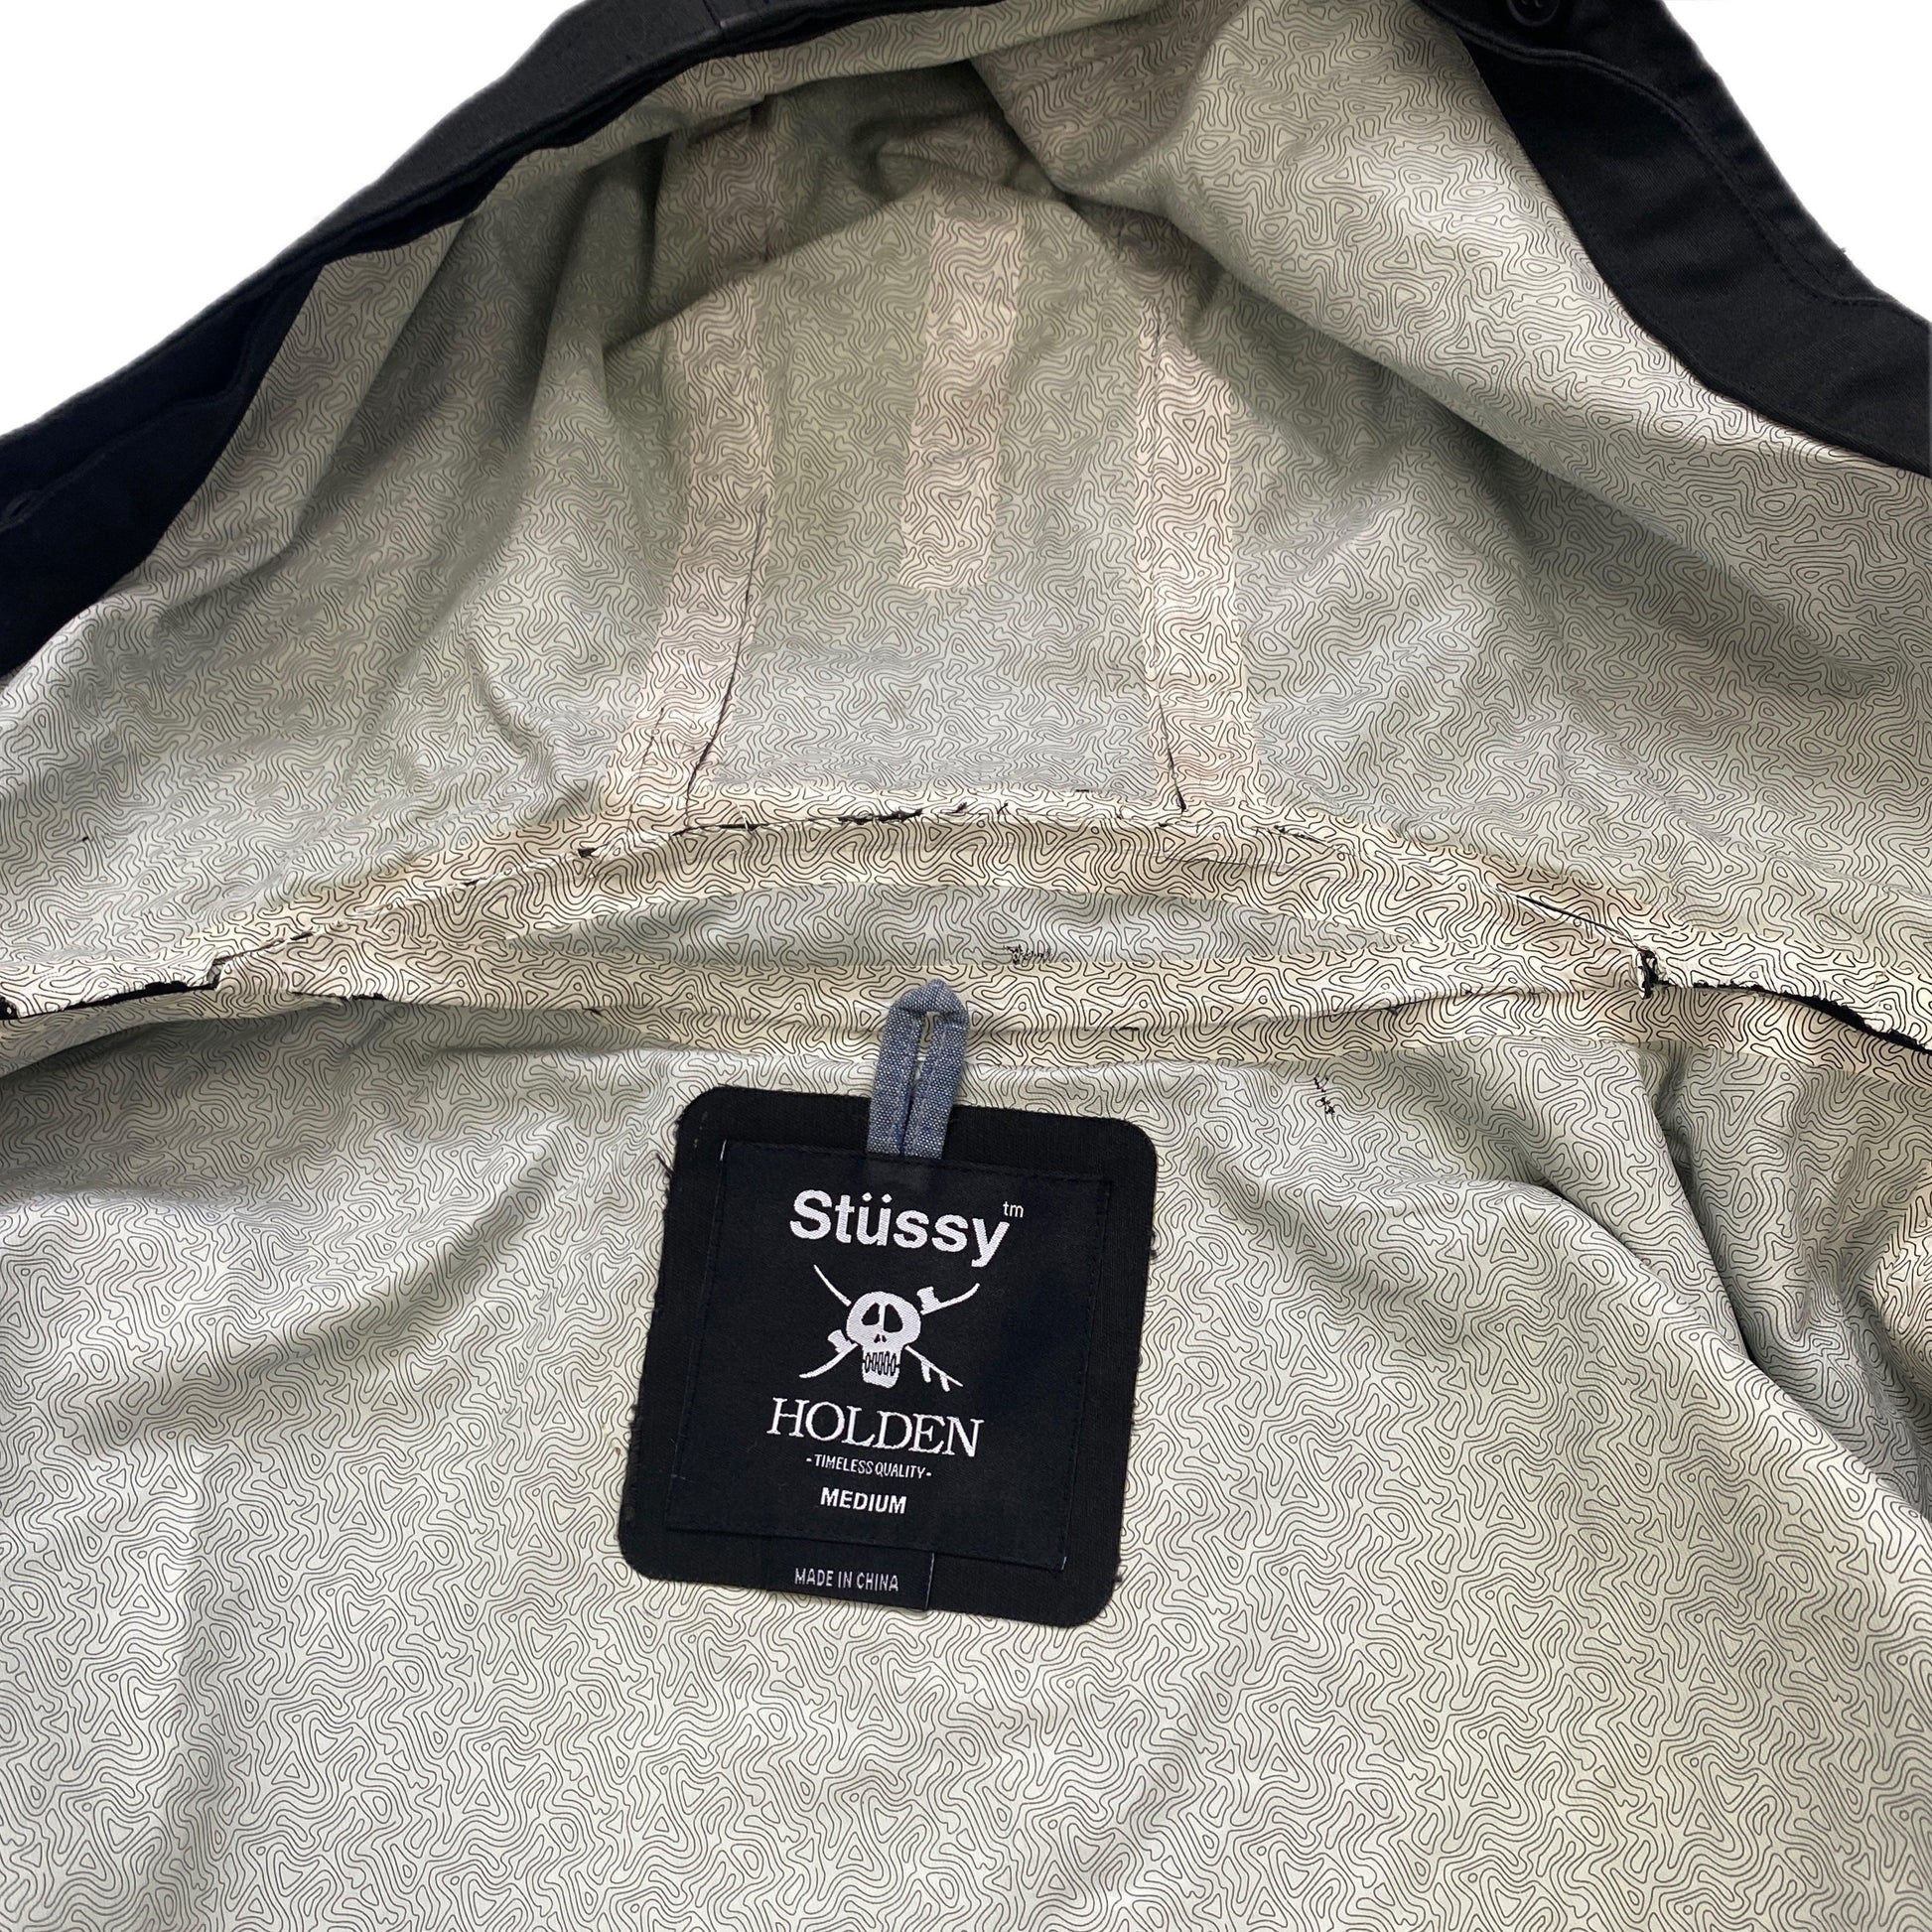 STUSSY x HOLDEN 2012 COLLAB JACKET (M) - Known Source